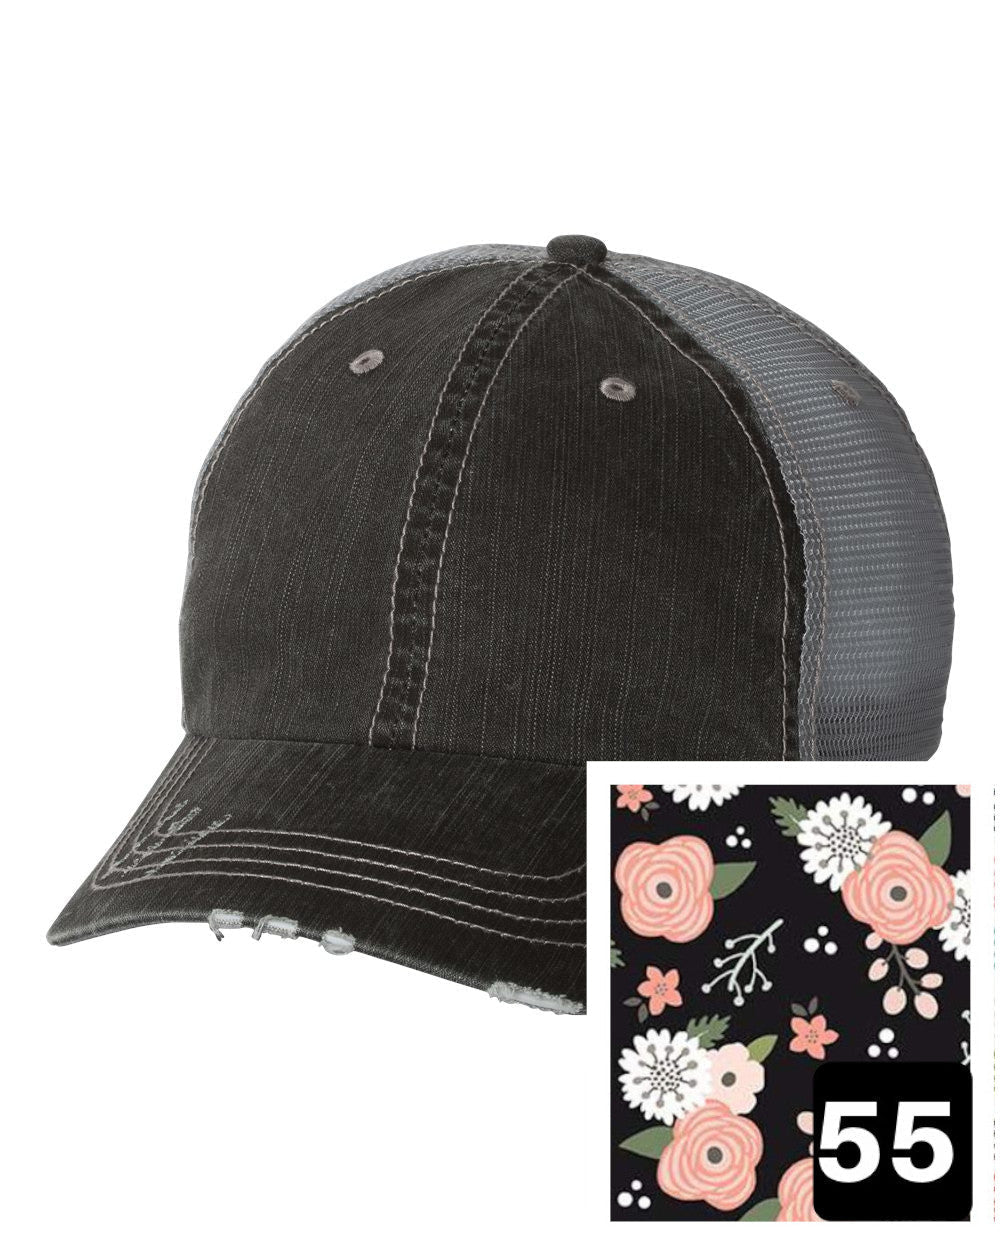 gray distressed trucker hat with petite floral on navy fabric state of Delaware